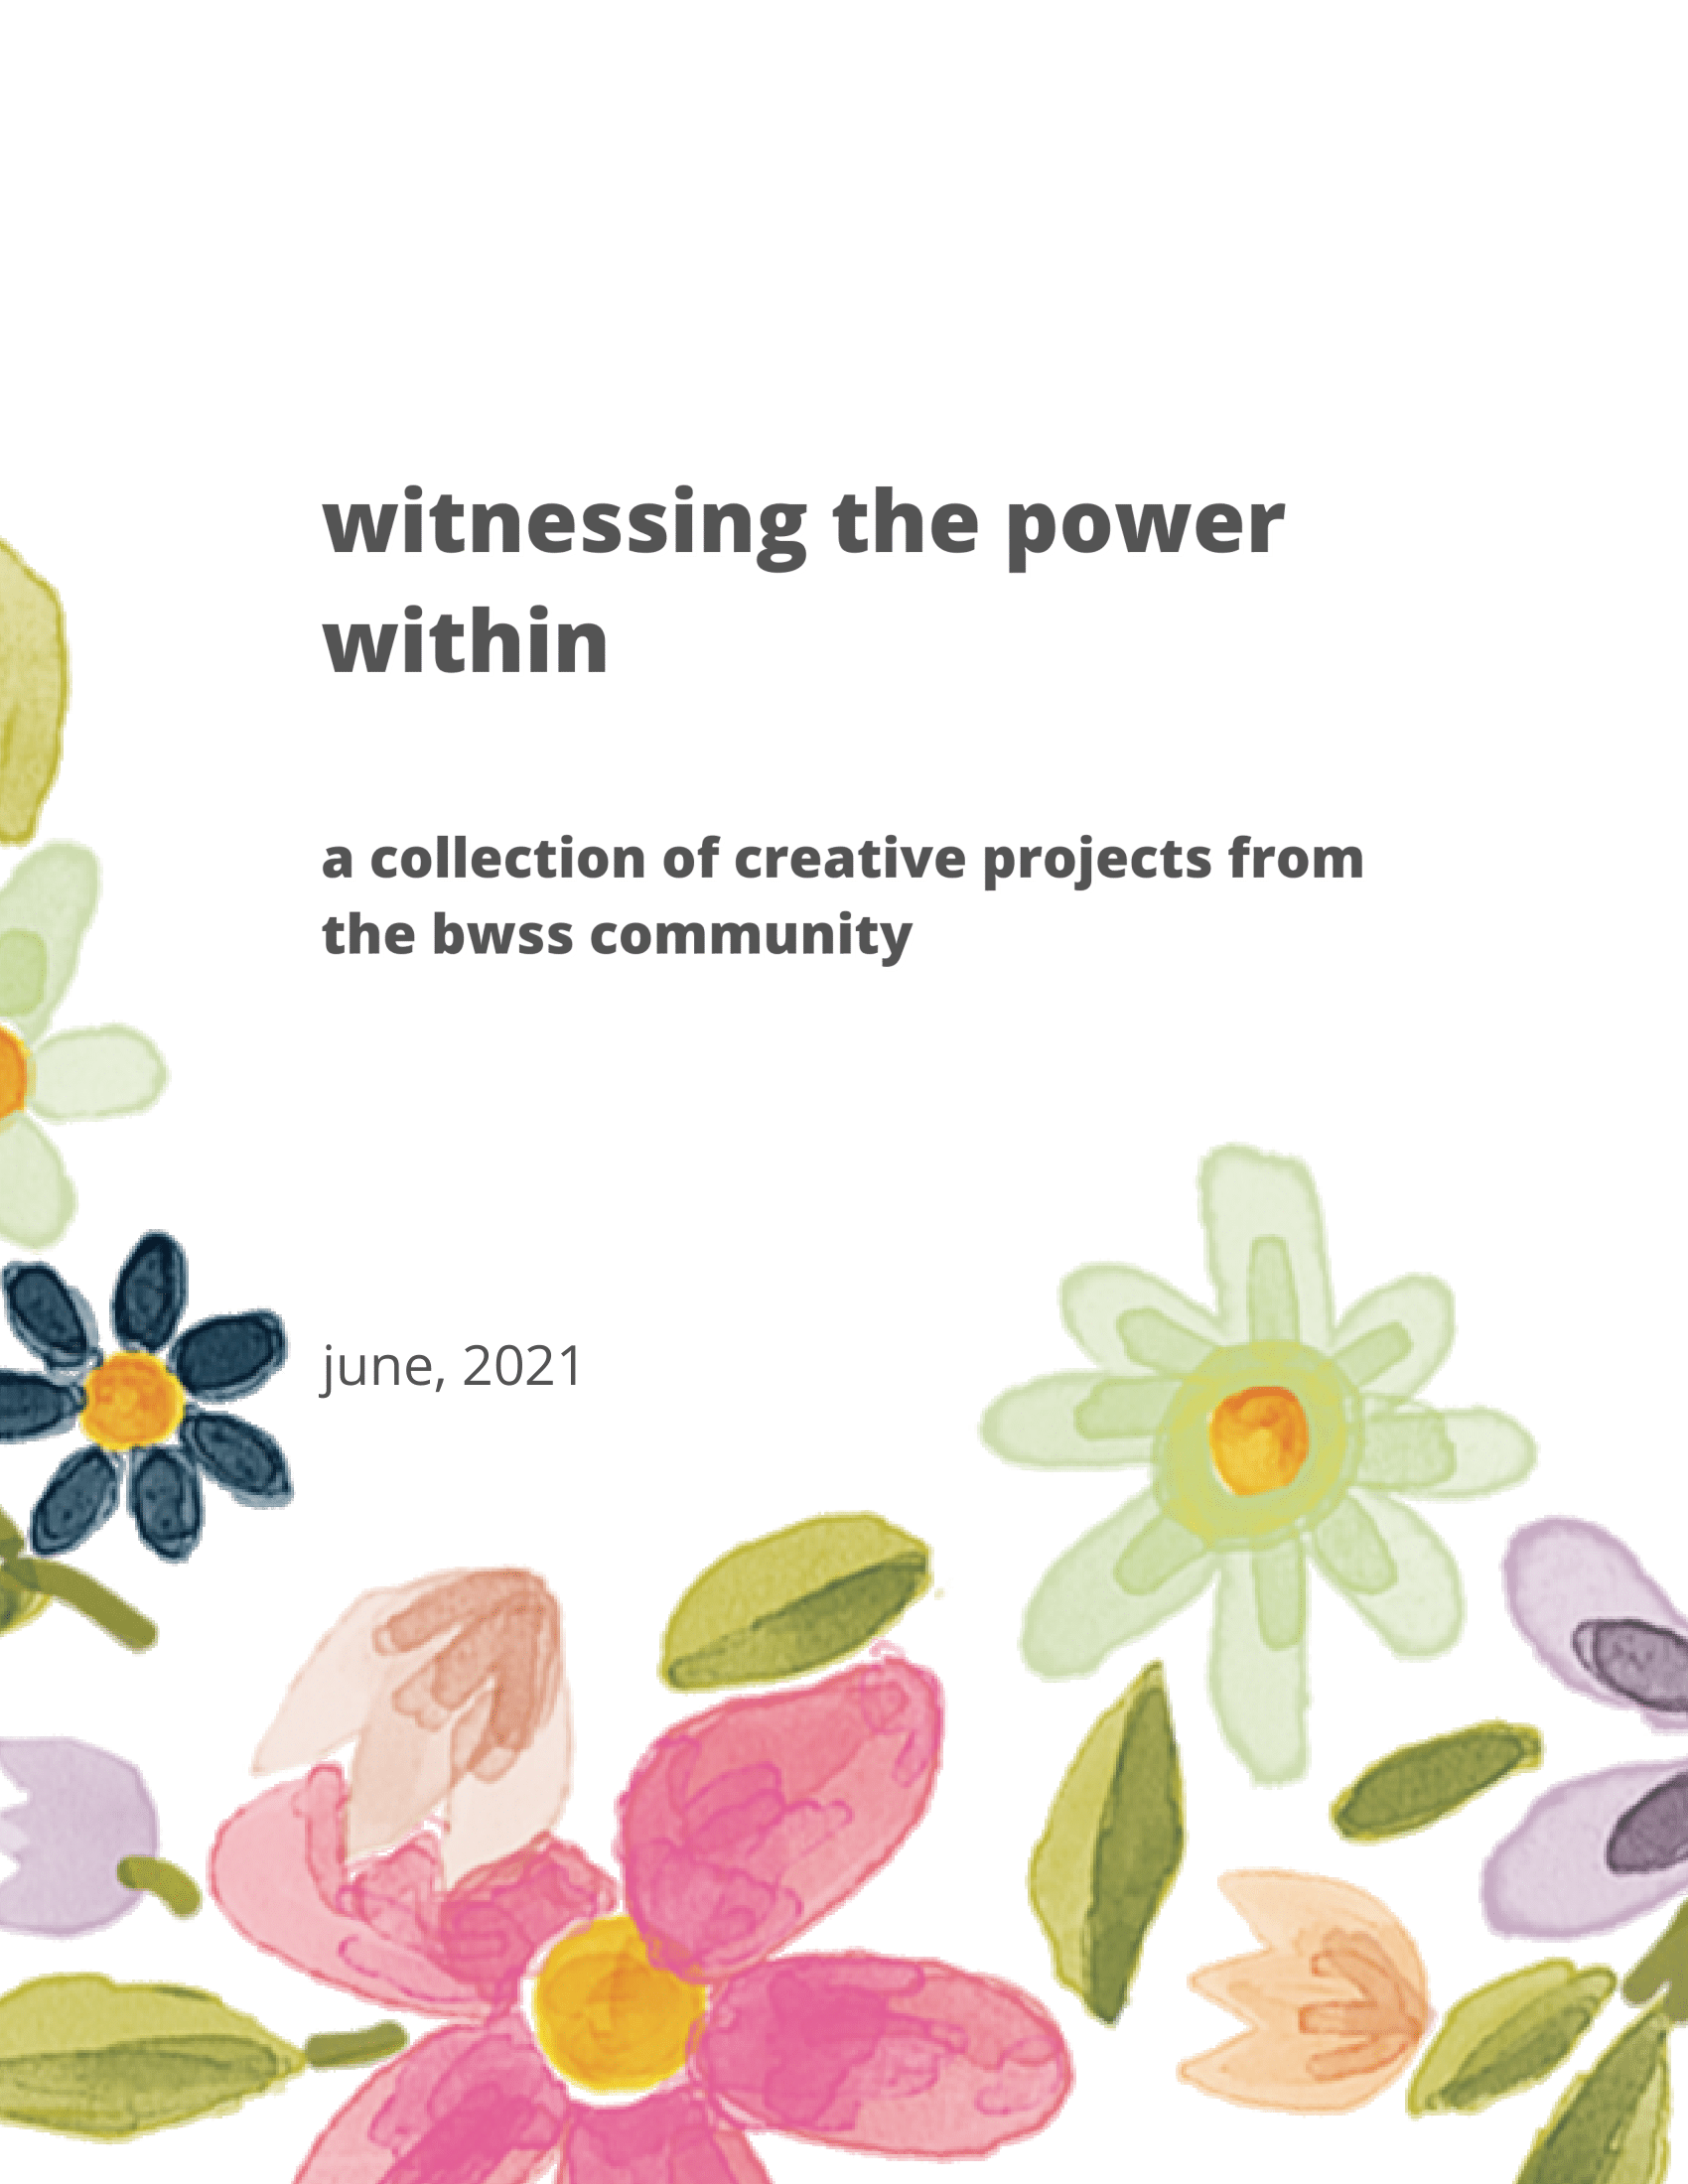 “Witnessing the power within” is a collection of creative projects created by Nine artists who experienced gender-based violence.